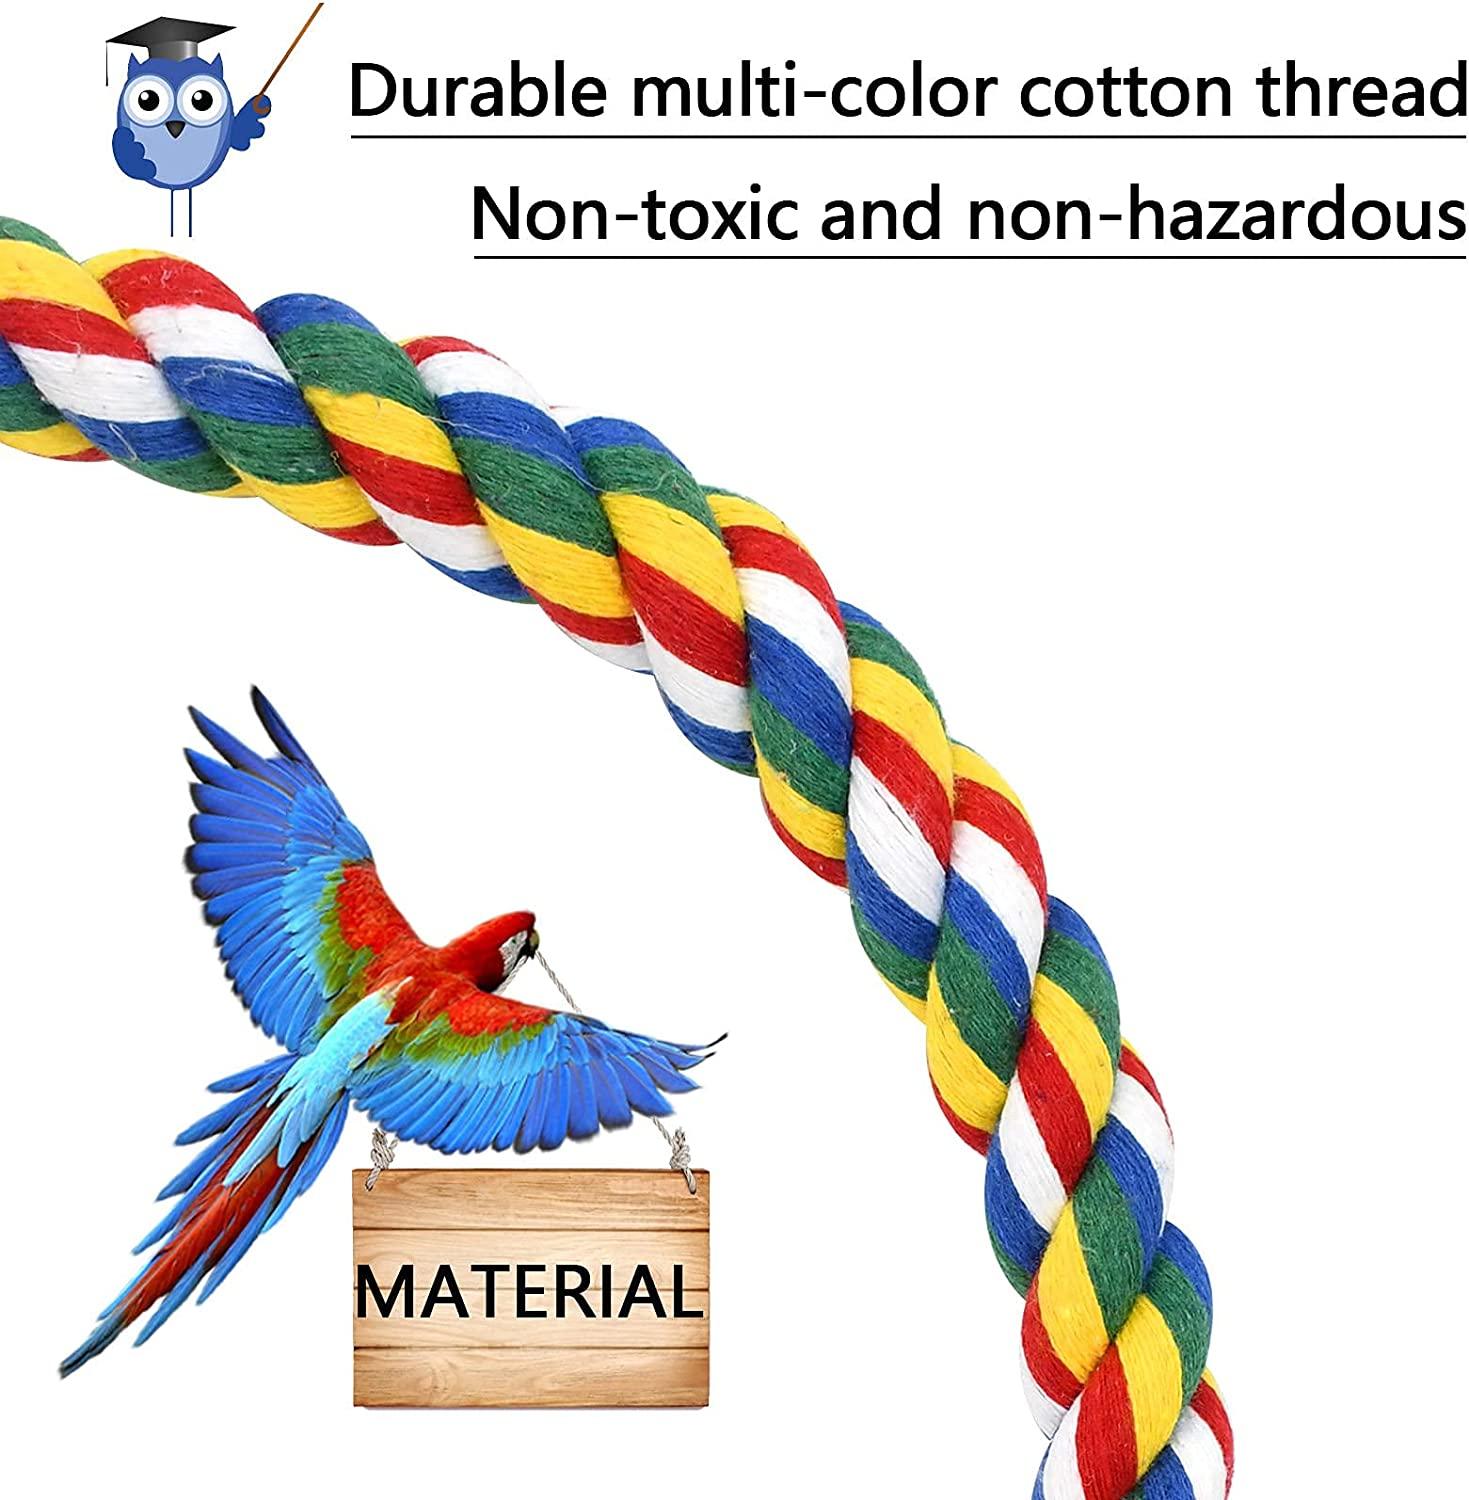 Mygeromon bird rope perch for parrots, cockatiels, parakeets, budgie cages  comfy birds colorful rope perches toy (